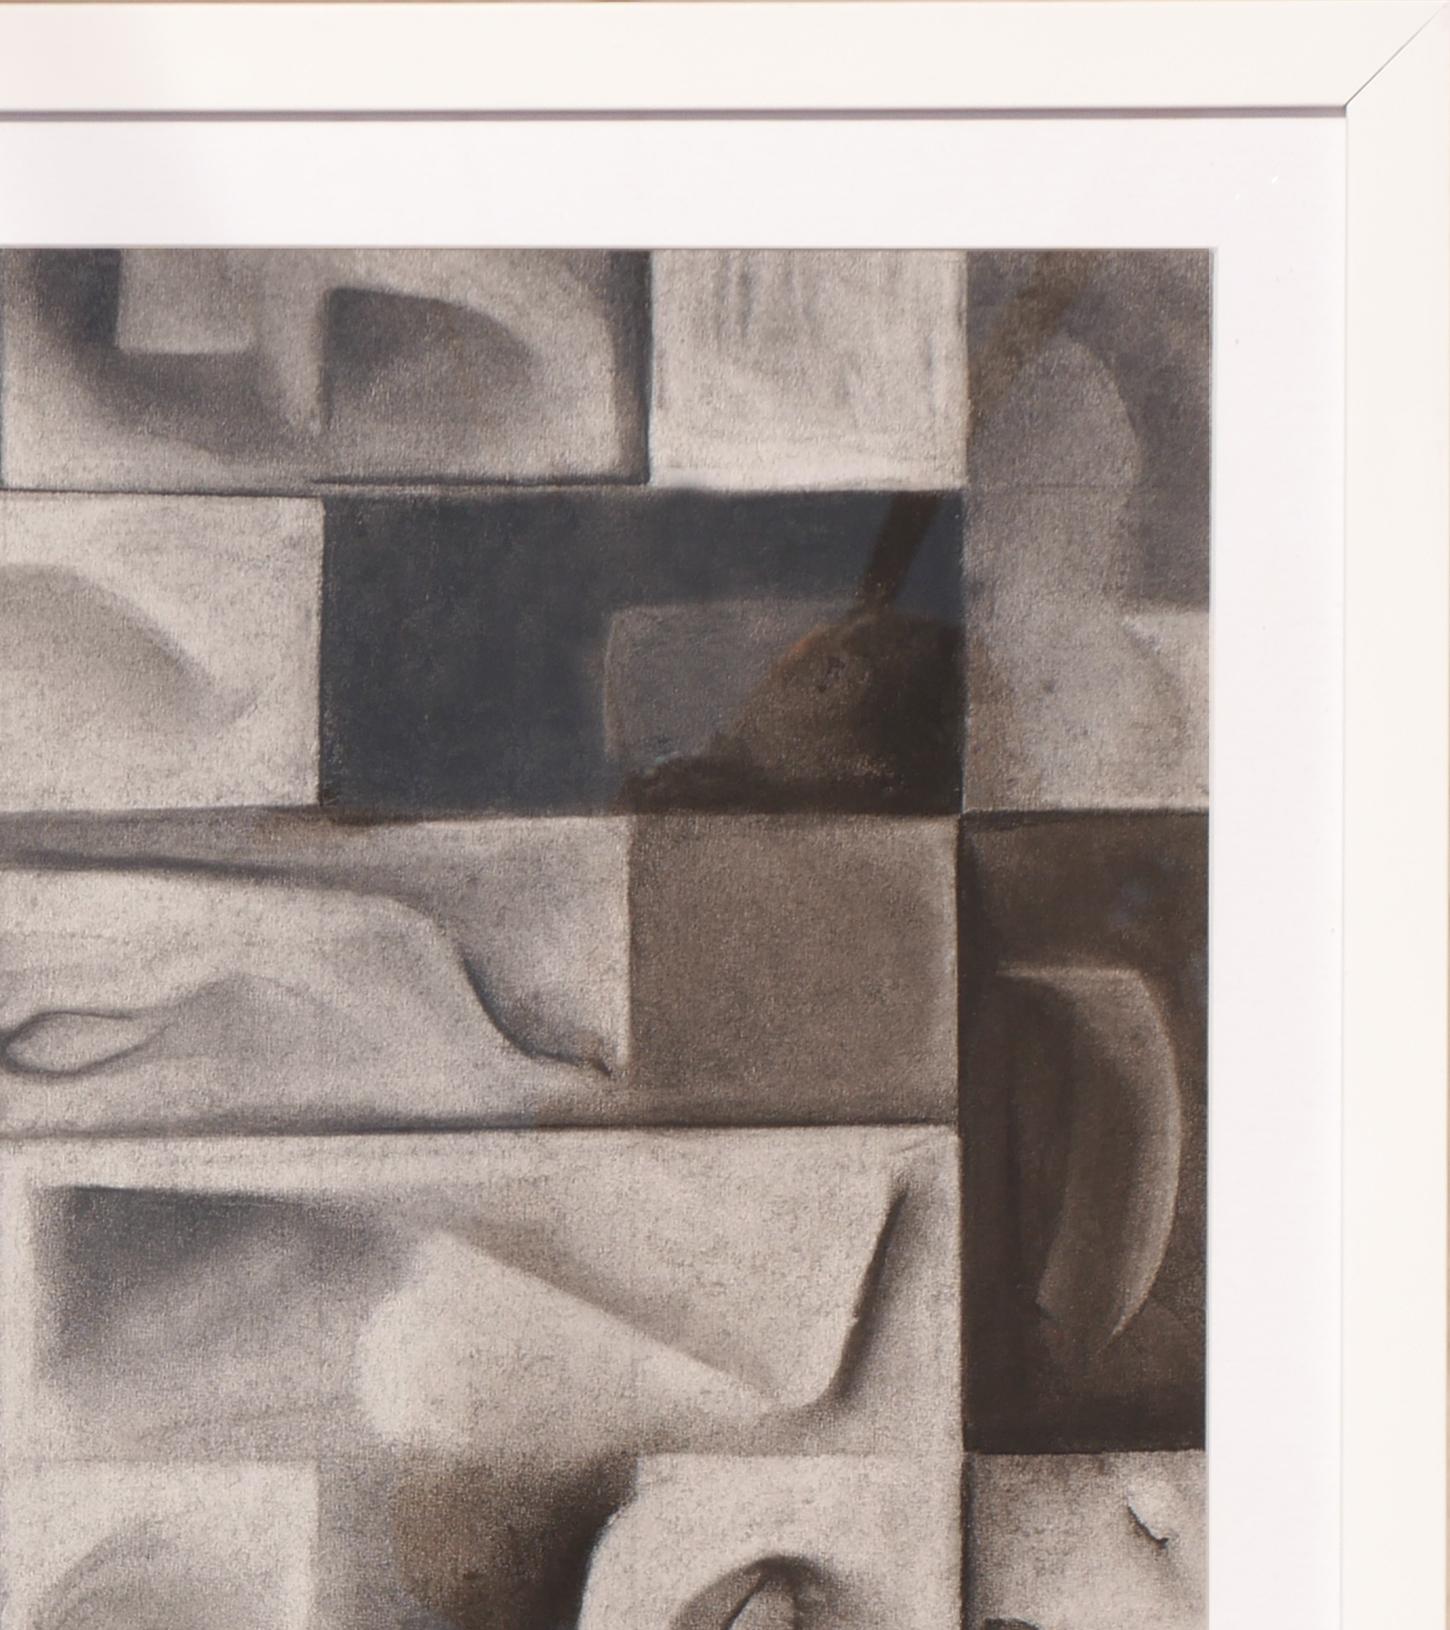 Contemporary black and white geometric charcoal drawing by artist James McCahon. This drawing features an unbalanced composition of dark and light square and rectangular shapes Signed and dated at the bottom right corner and is currently hung in a